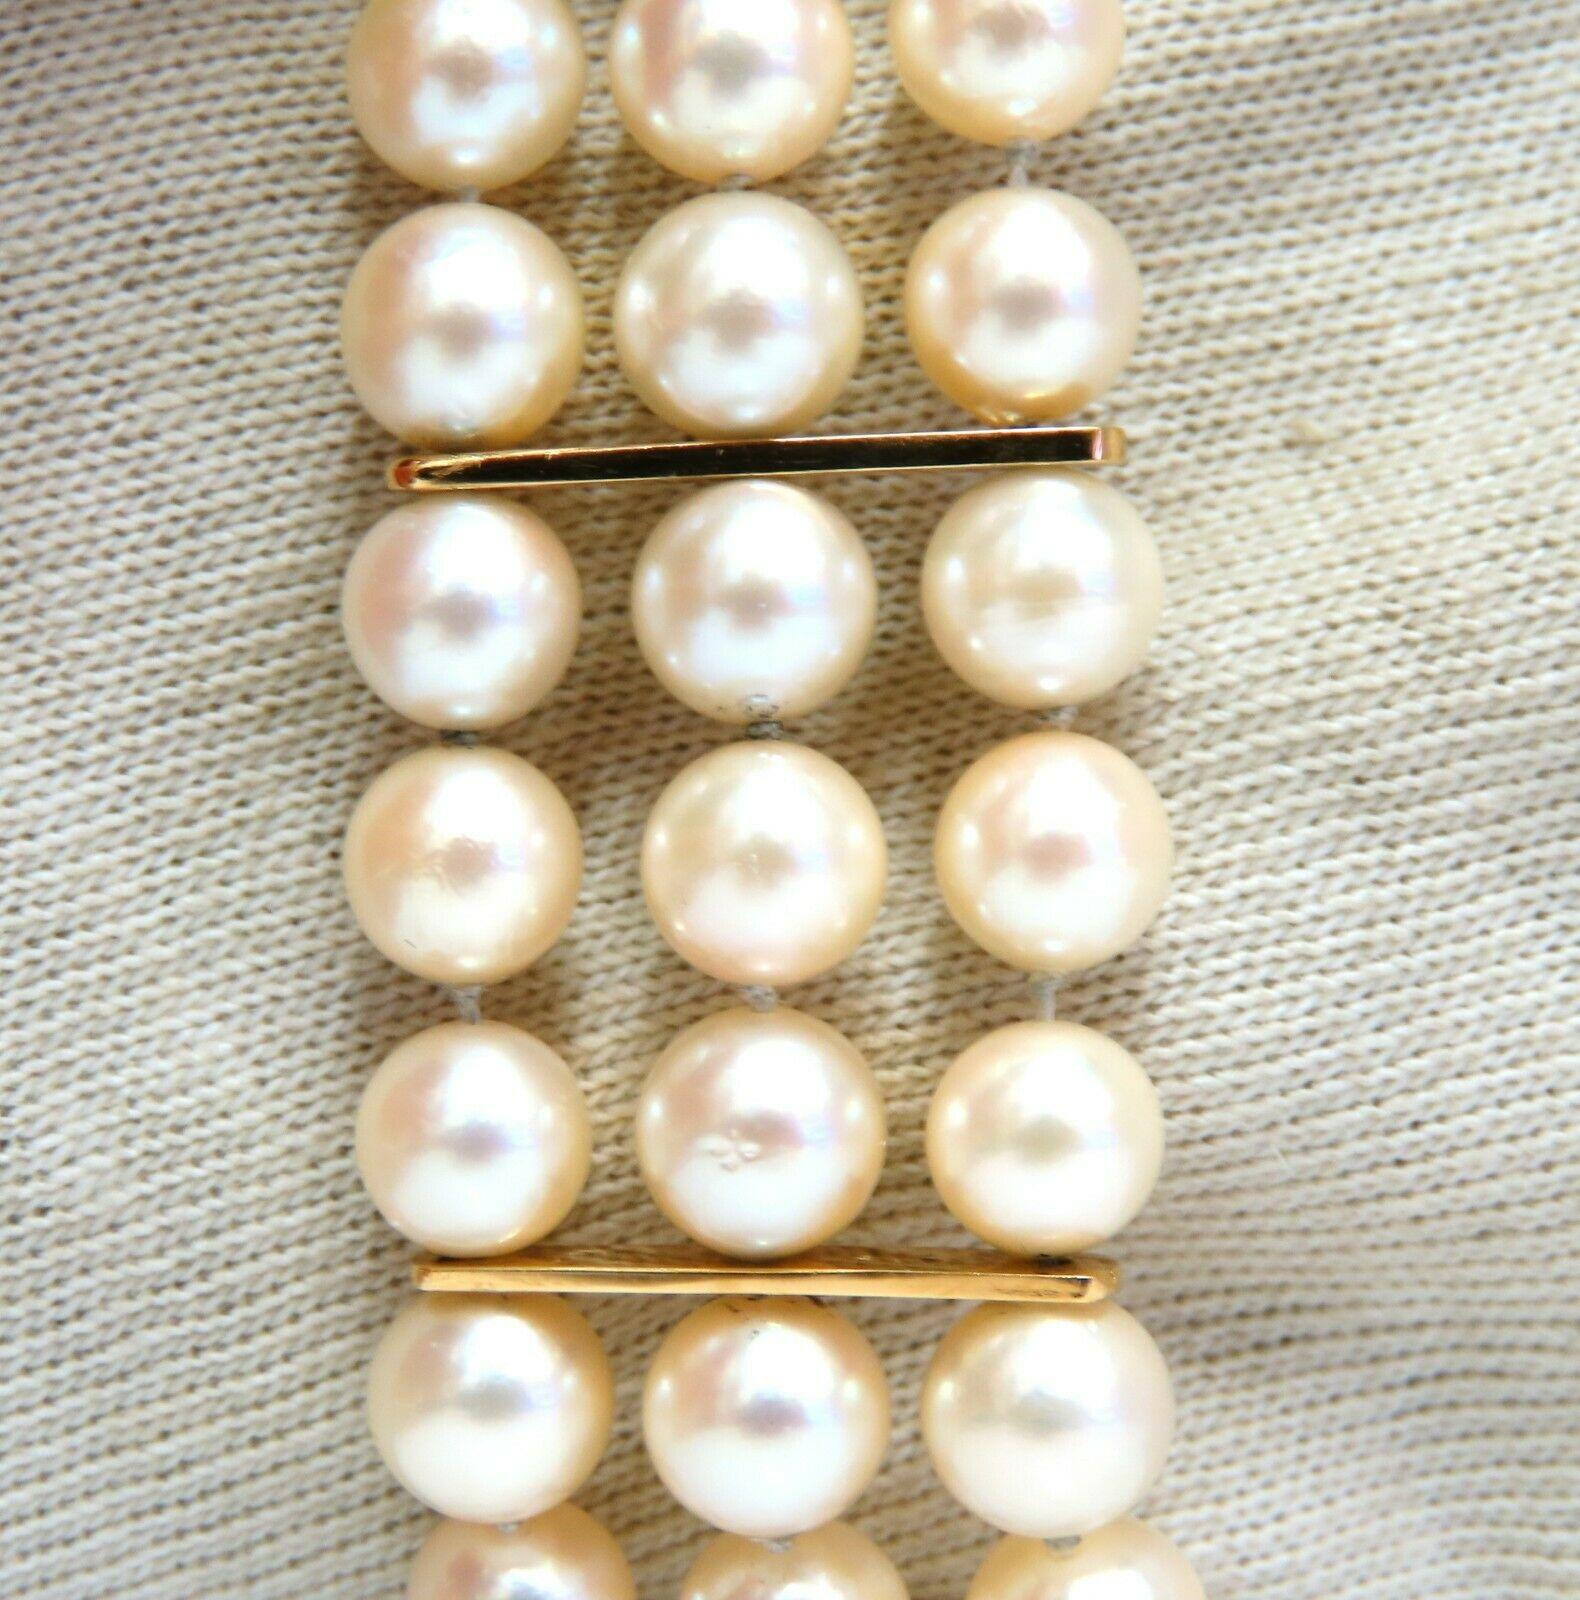 6.5 mm Akoya pearls bracelet.

Three stranded and bar linked.

20mm wide.

14 karat yellow gold

7.5 in Long

Comfortable stud beaded clasp